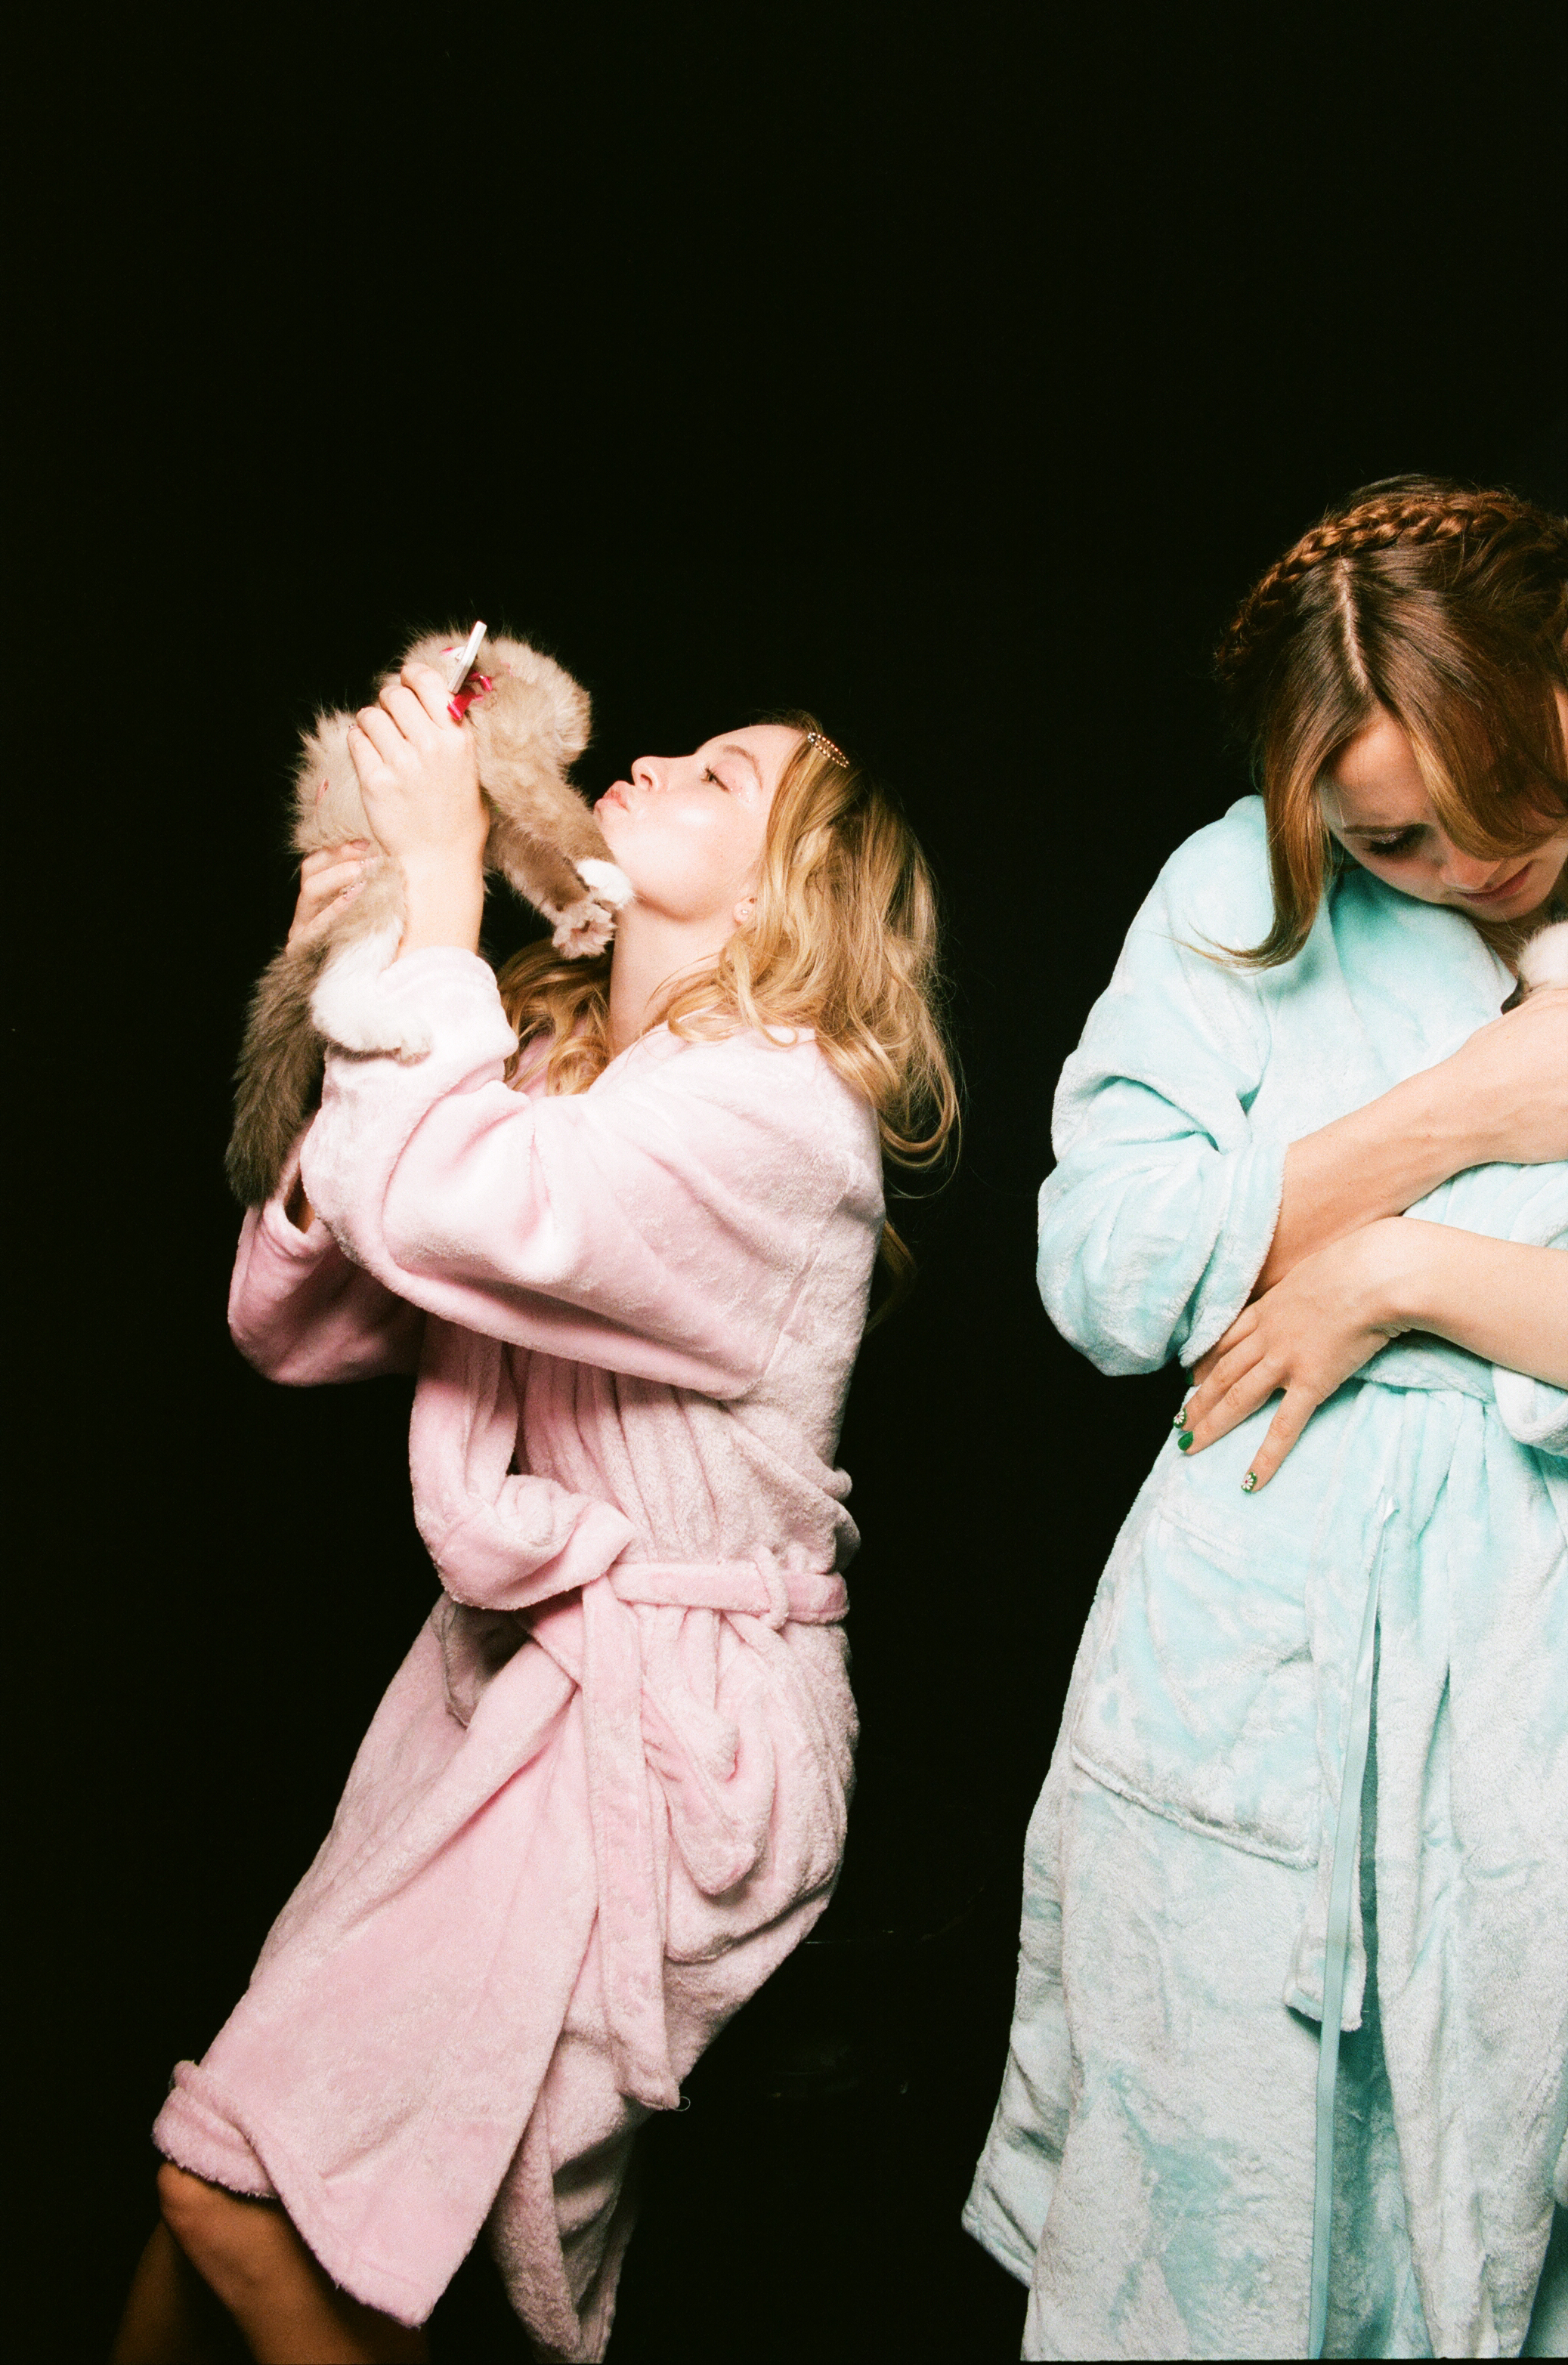 Sydney Sweeney and Maude Apatow hug animals in dressing gowns 